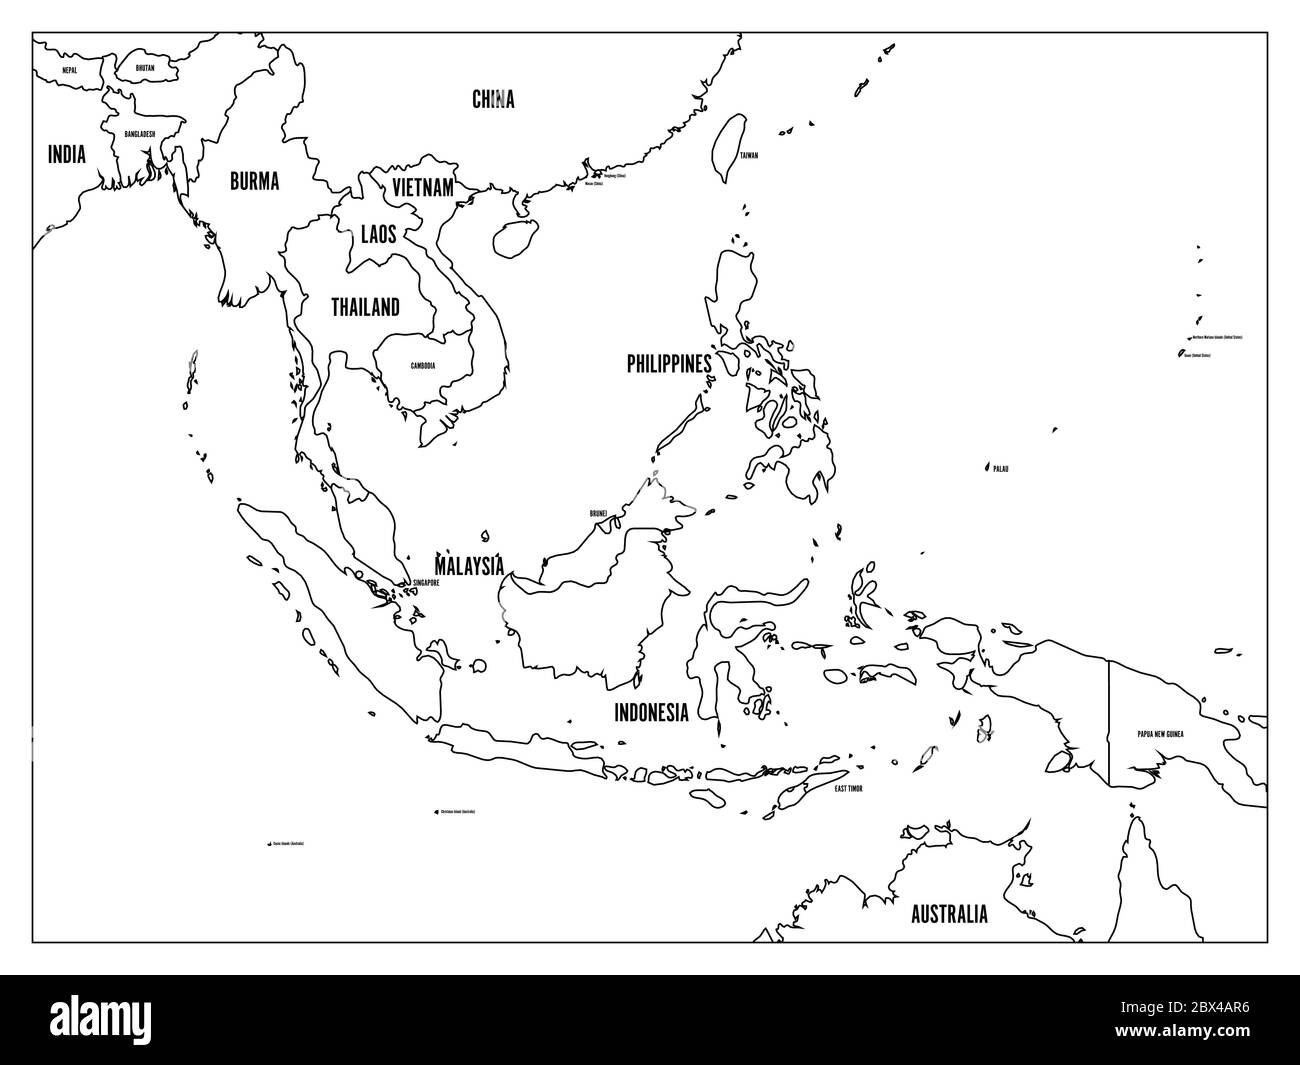 South East Asia political map. Black outline on white background with ...